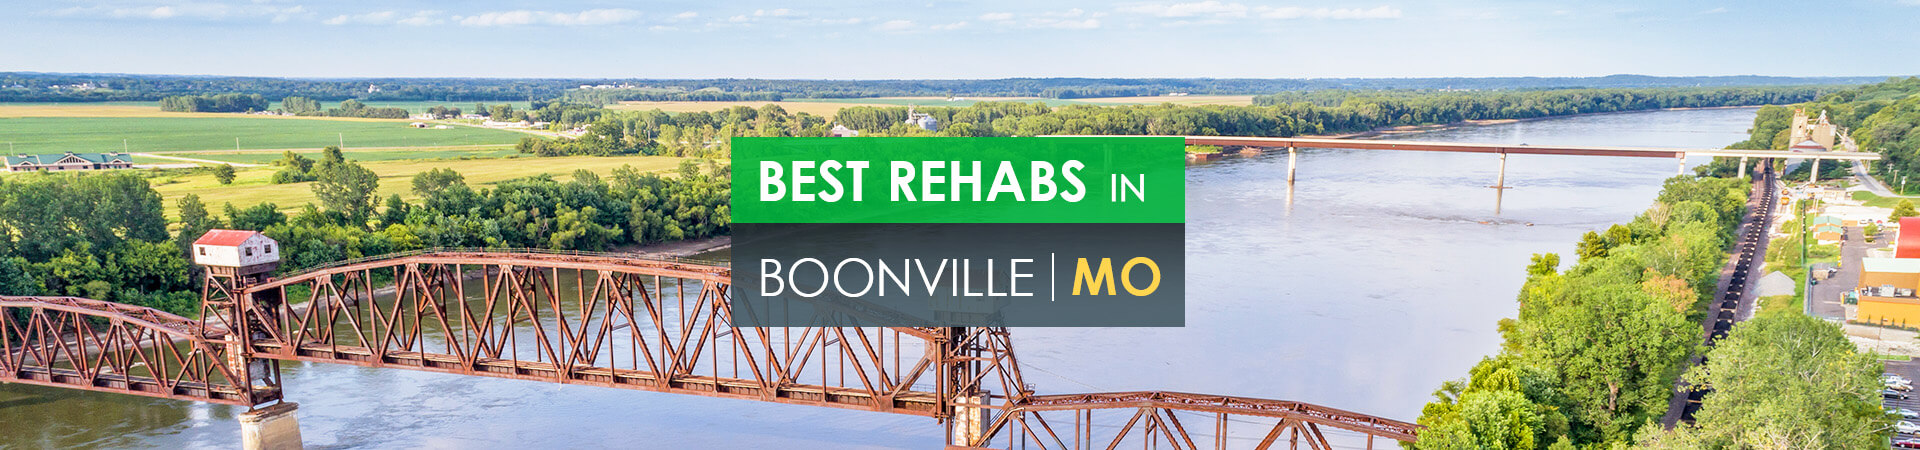 Best rehabs in Boonville, MO